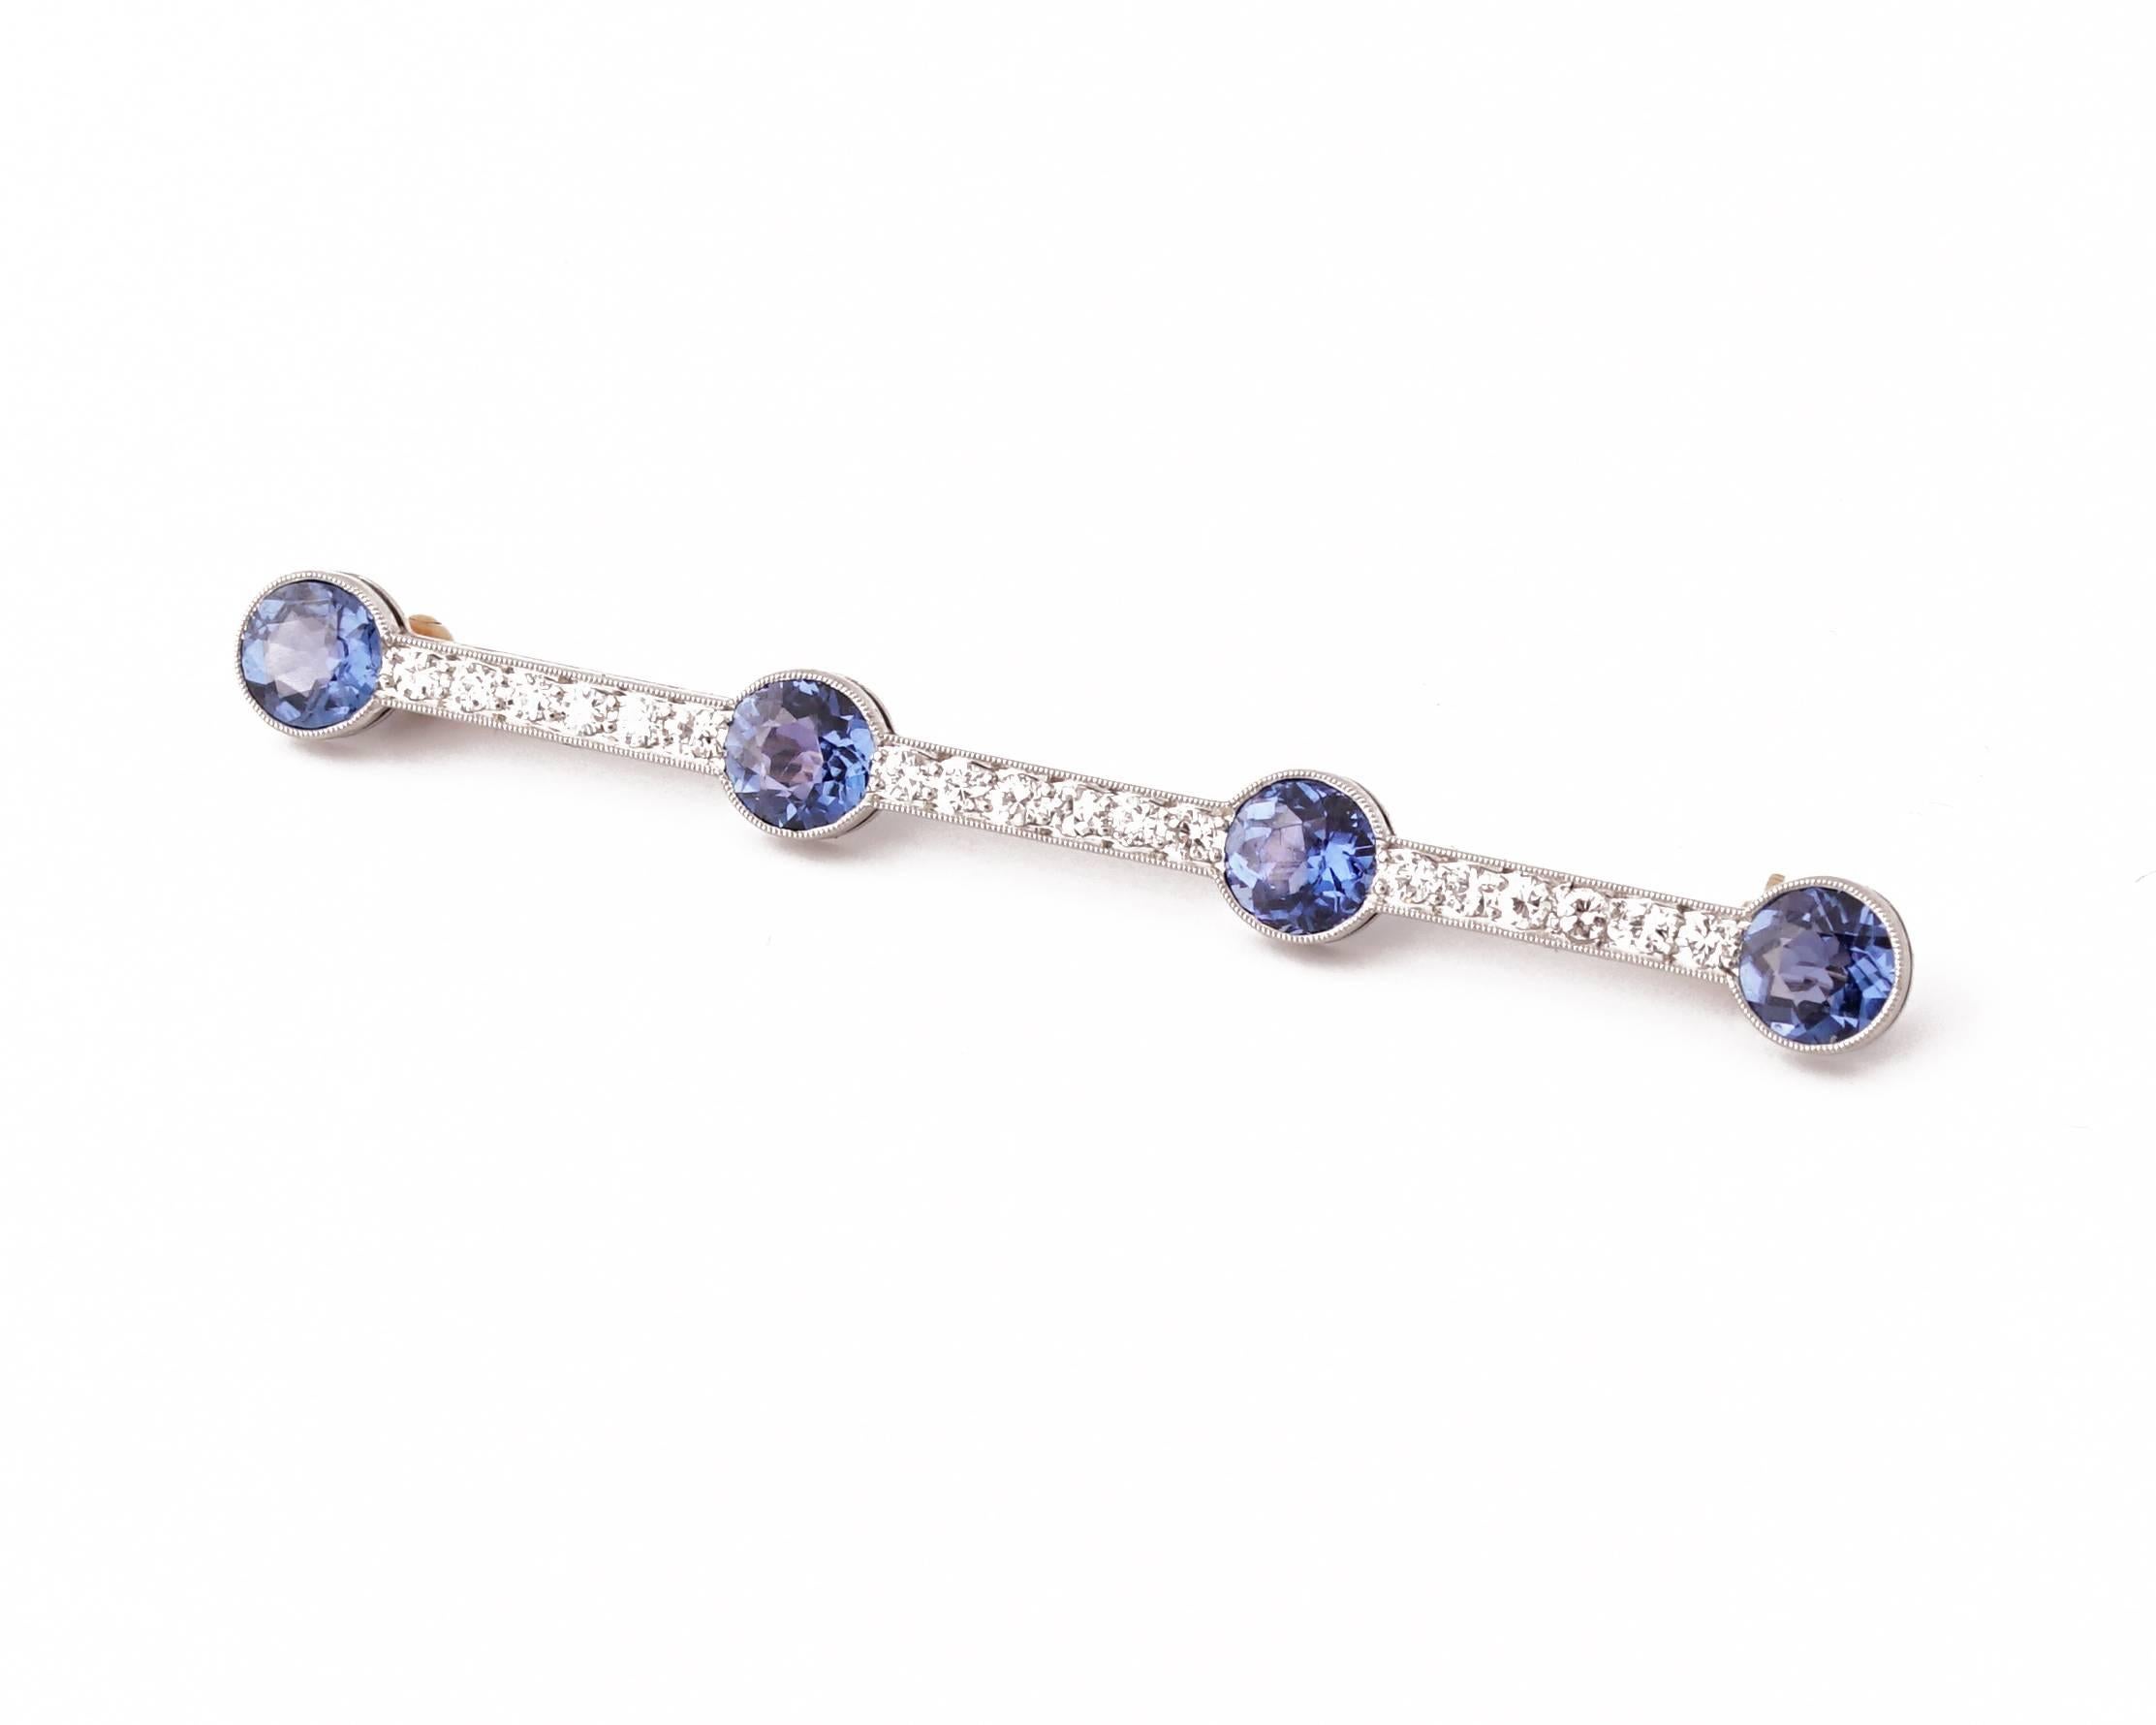 Rare and Beautiful Tiffany & Co Art Deco Brooch, Circa 1925.
Simple elongated millegrained design mounted in platinum, with 3 rows of Round-cut bright diamonds (weight 0.35 carat, F-G colour, VS clarity) and a quartet of bezel-set sapphires (Total